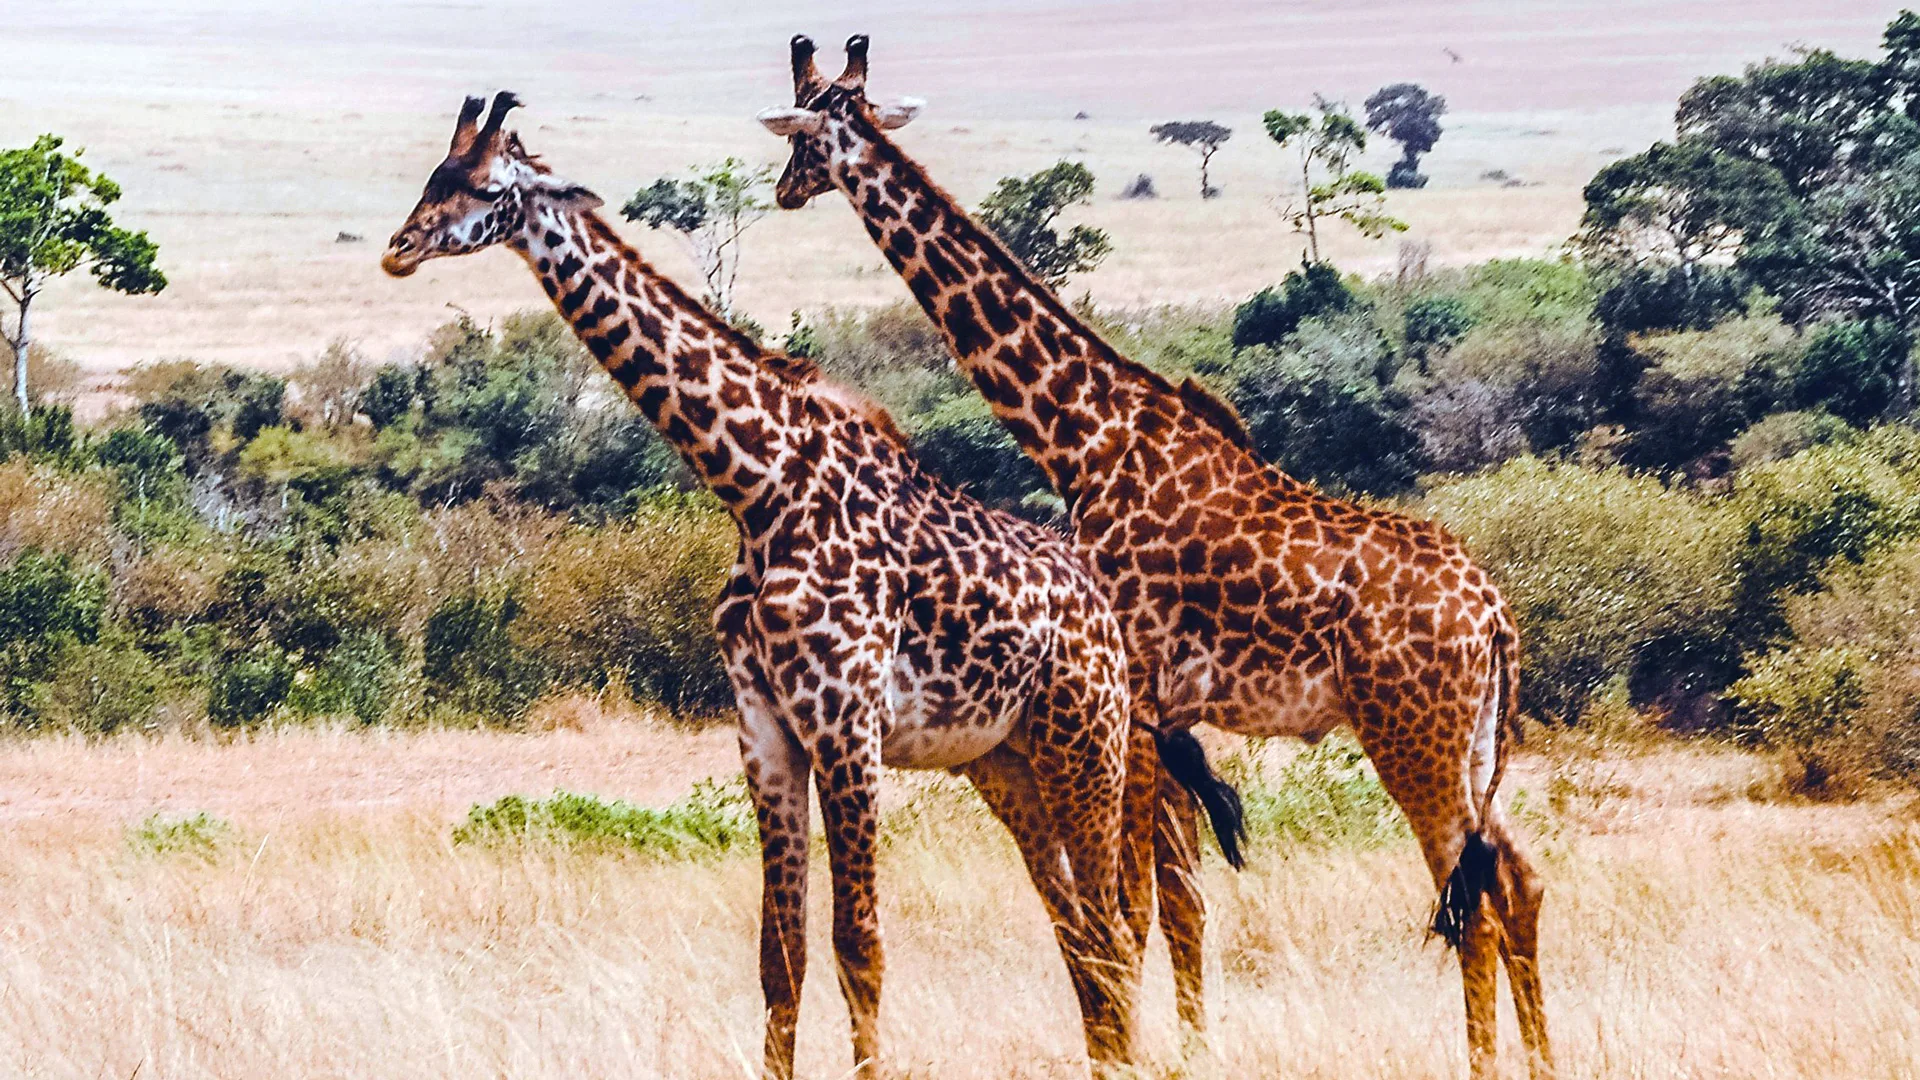 A photograph of two giraffes standing next to eachother in the African savannah